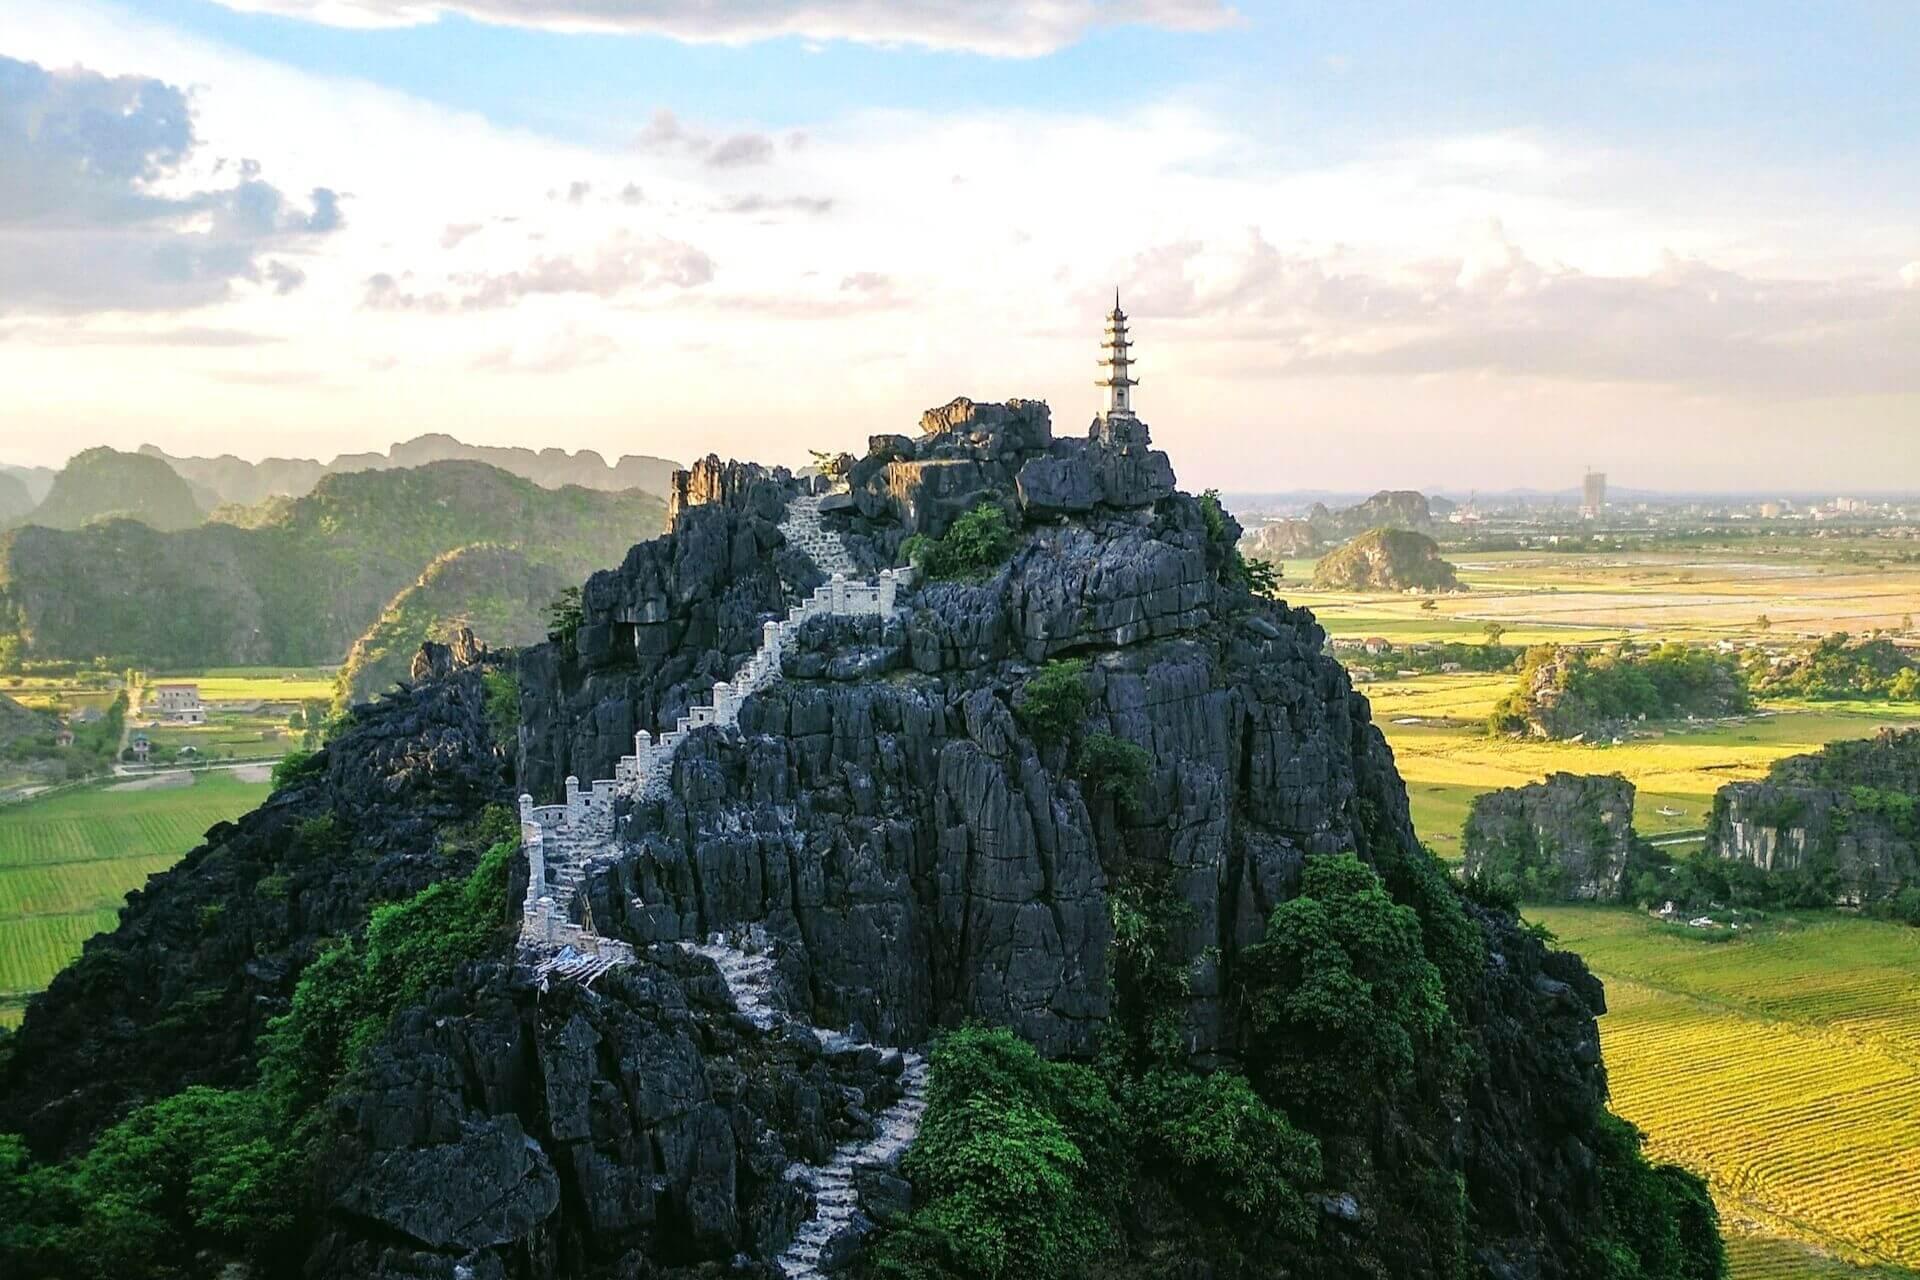 A temple on top of a mountain in Vietnam